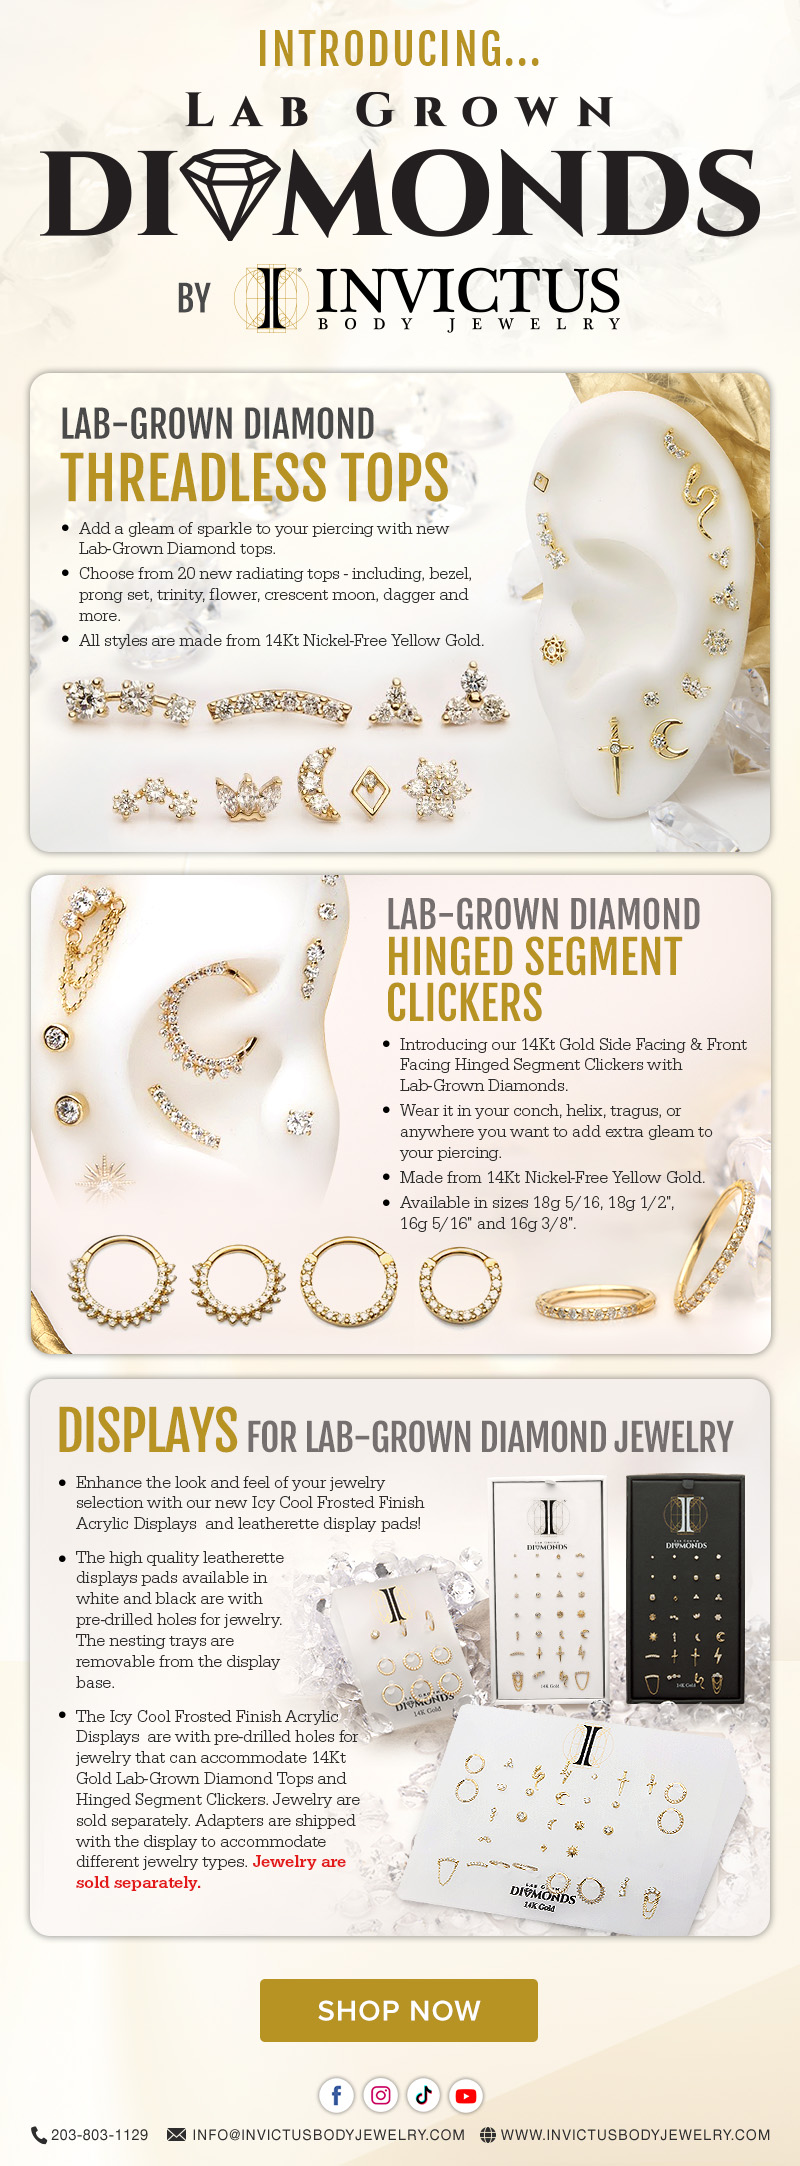 Invictus Body Jewelry Officially Launches Lab Grown Diamond Program!